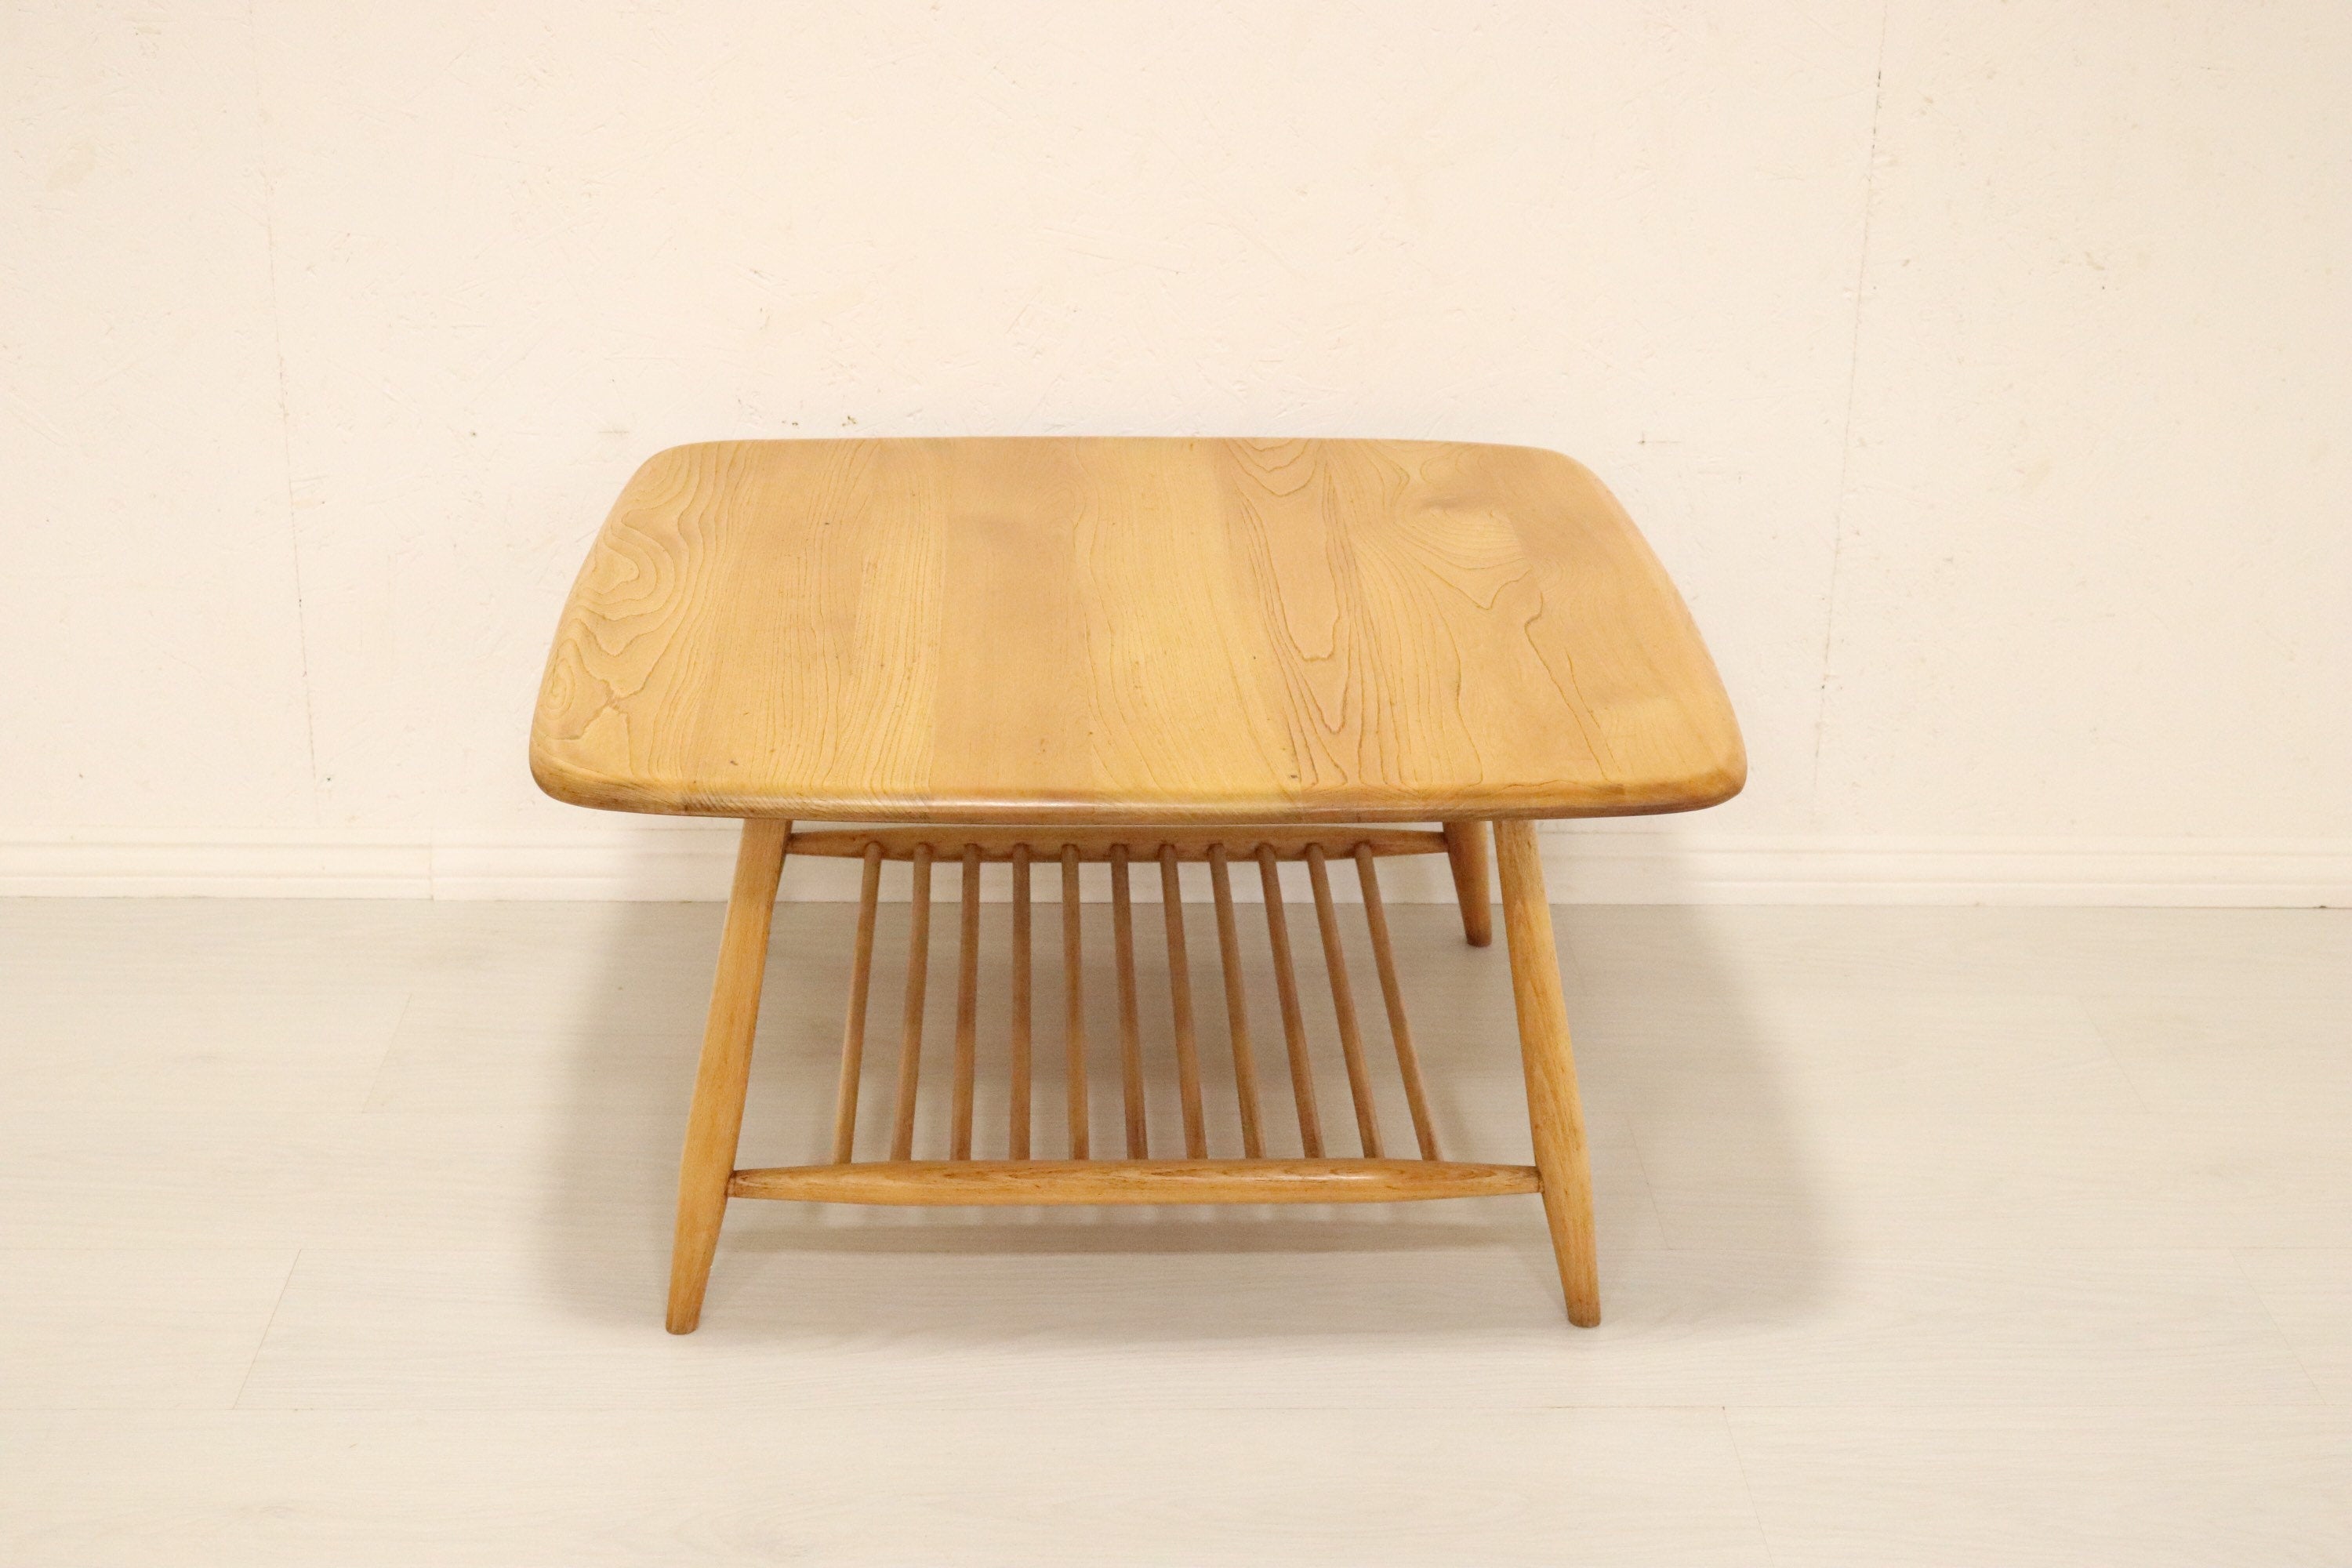 Rare Ercol Square Coffee Table with Magazine Rack - teakyfinders